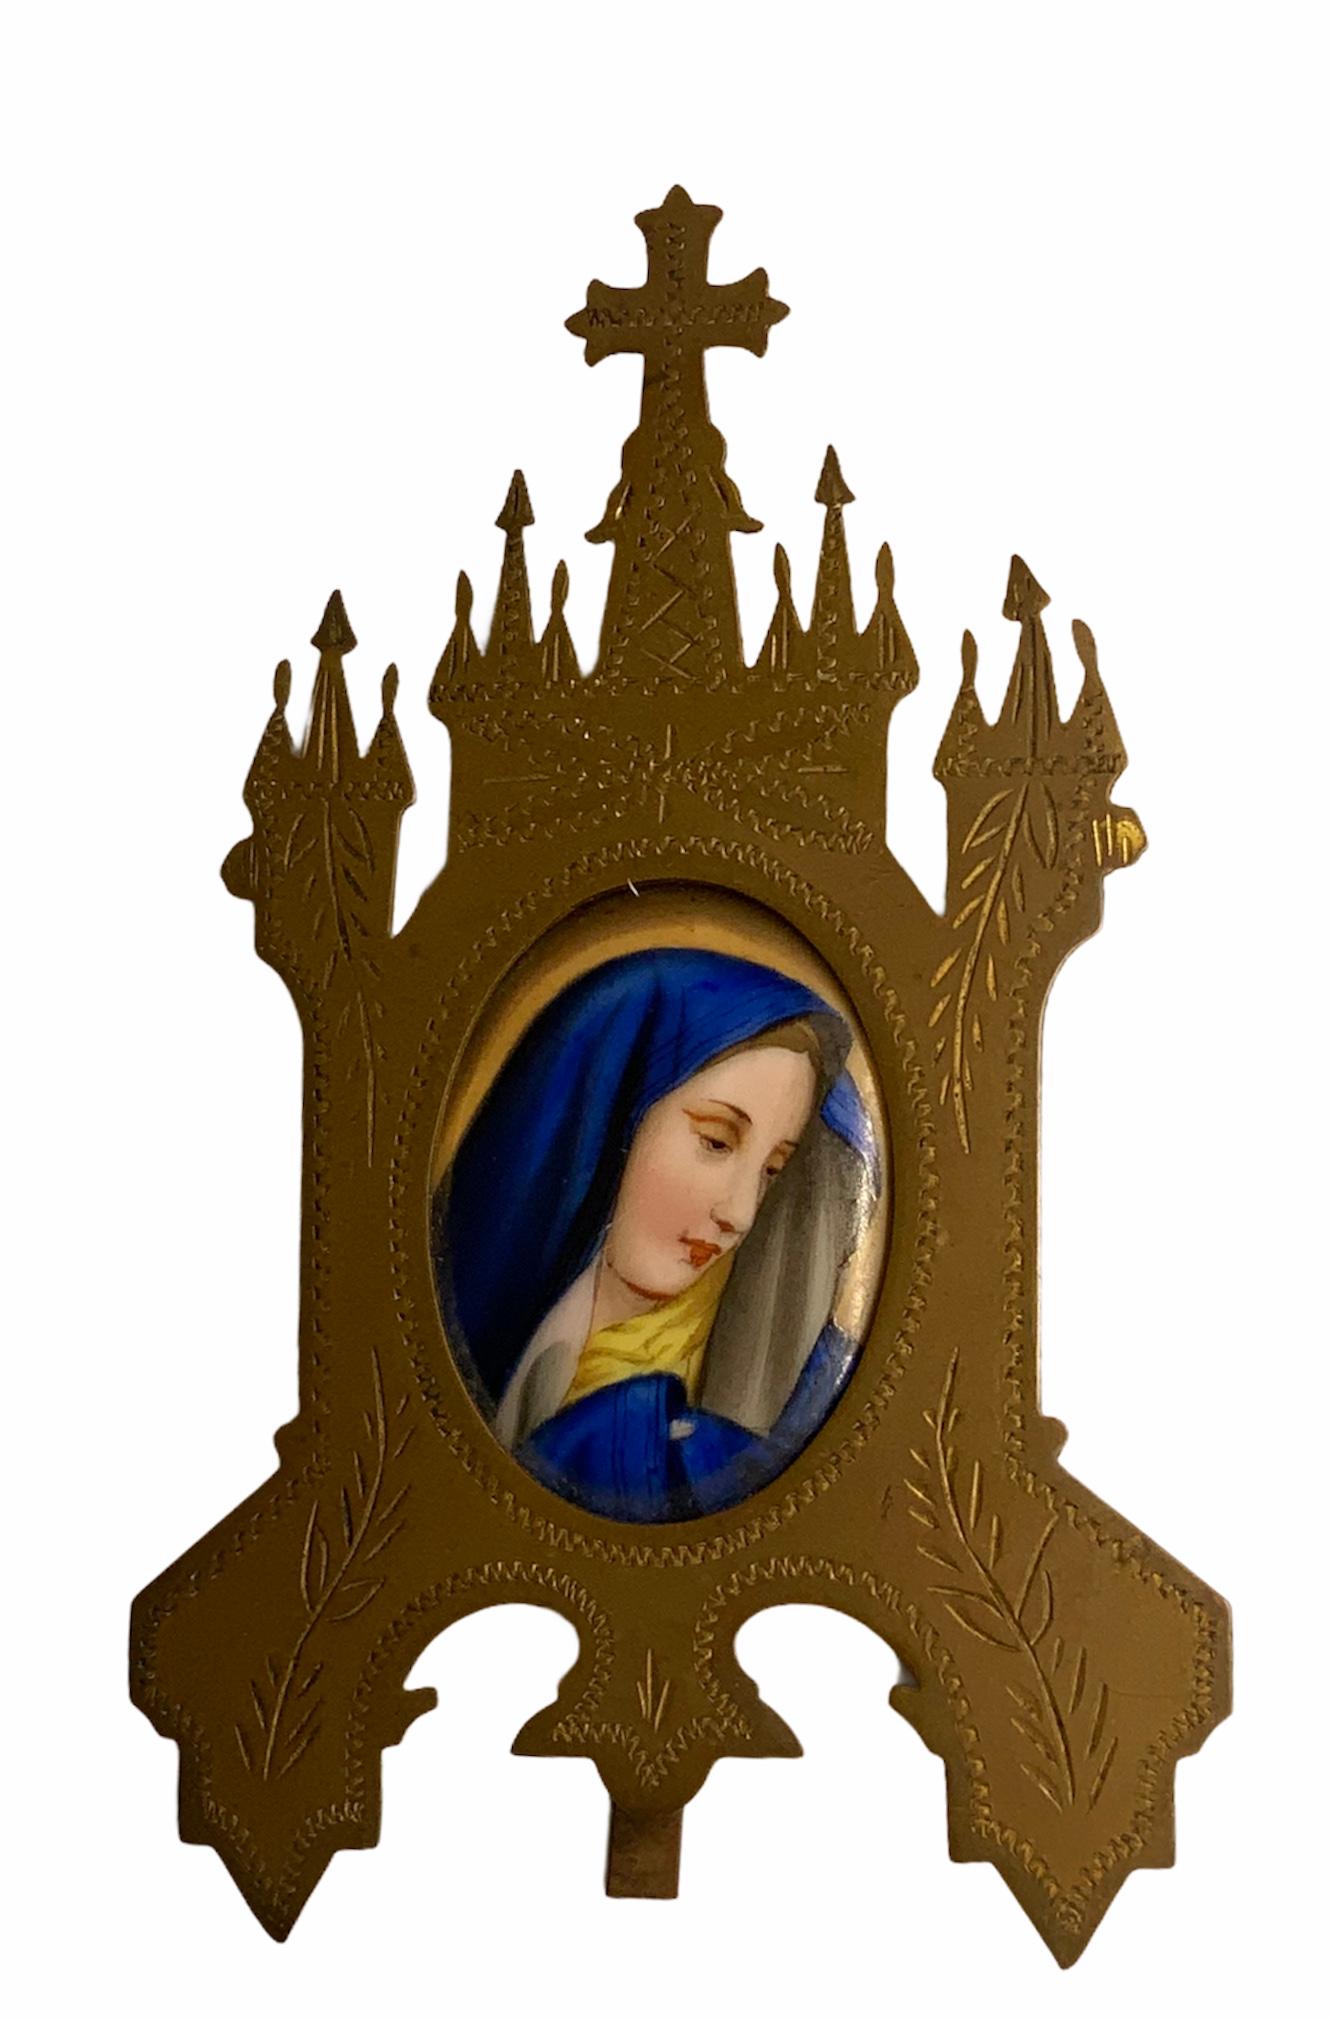 This is a hand painted porcelain oval portrait plaque of the Virgin Mary for home devotion. It is framed in a golden brass metal shaped as a gothic church that serves as a stand. The brass is adorned with some carvings of foliages and zigzags